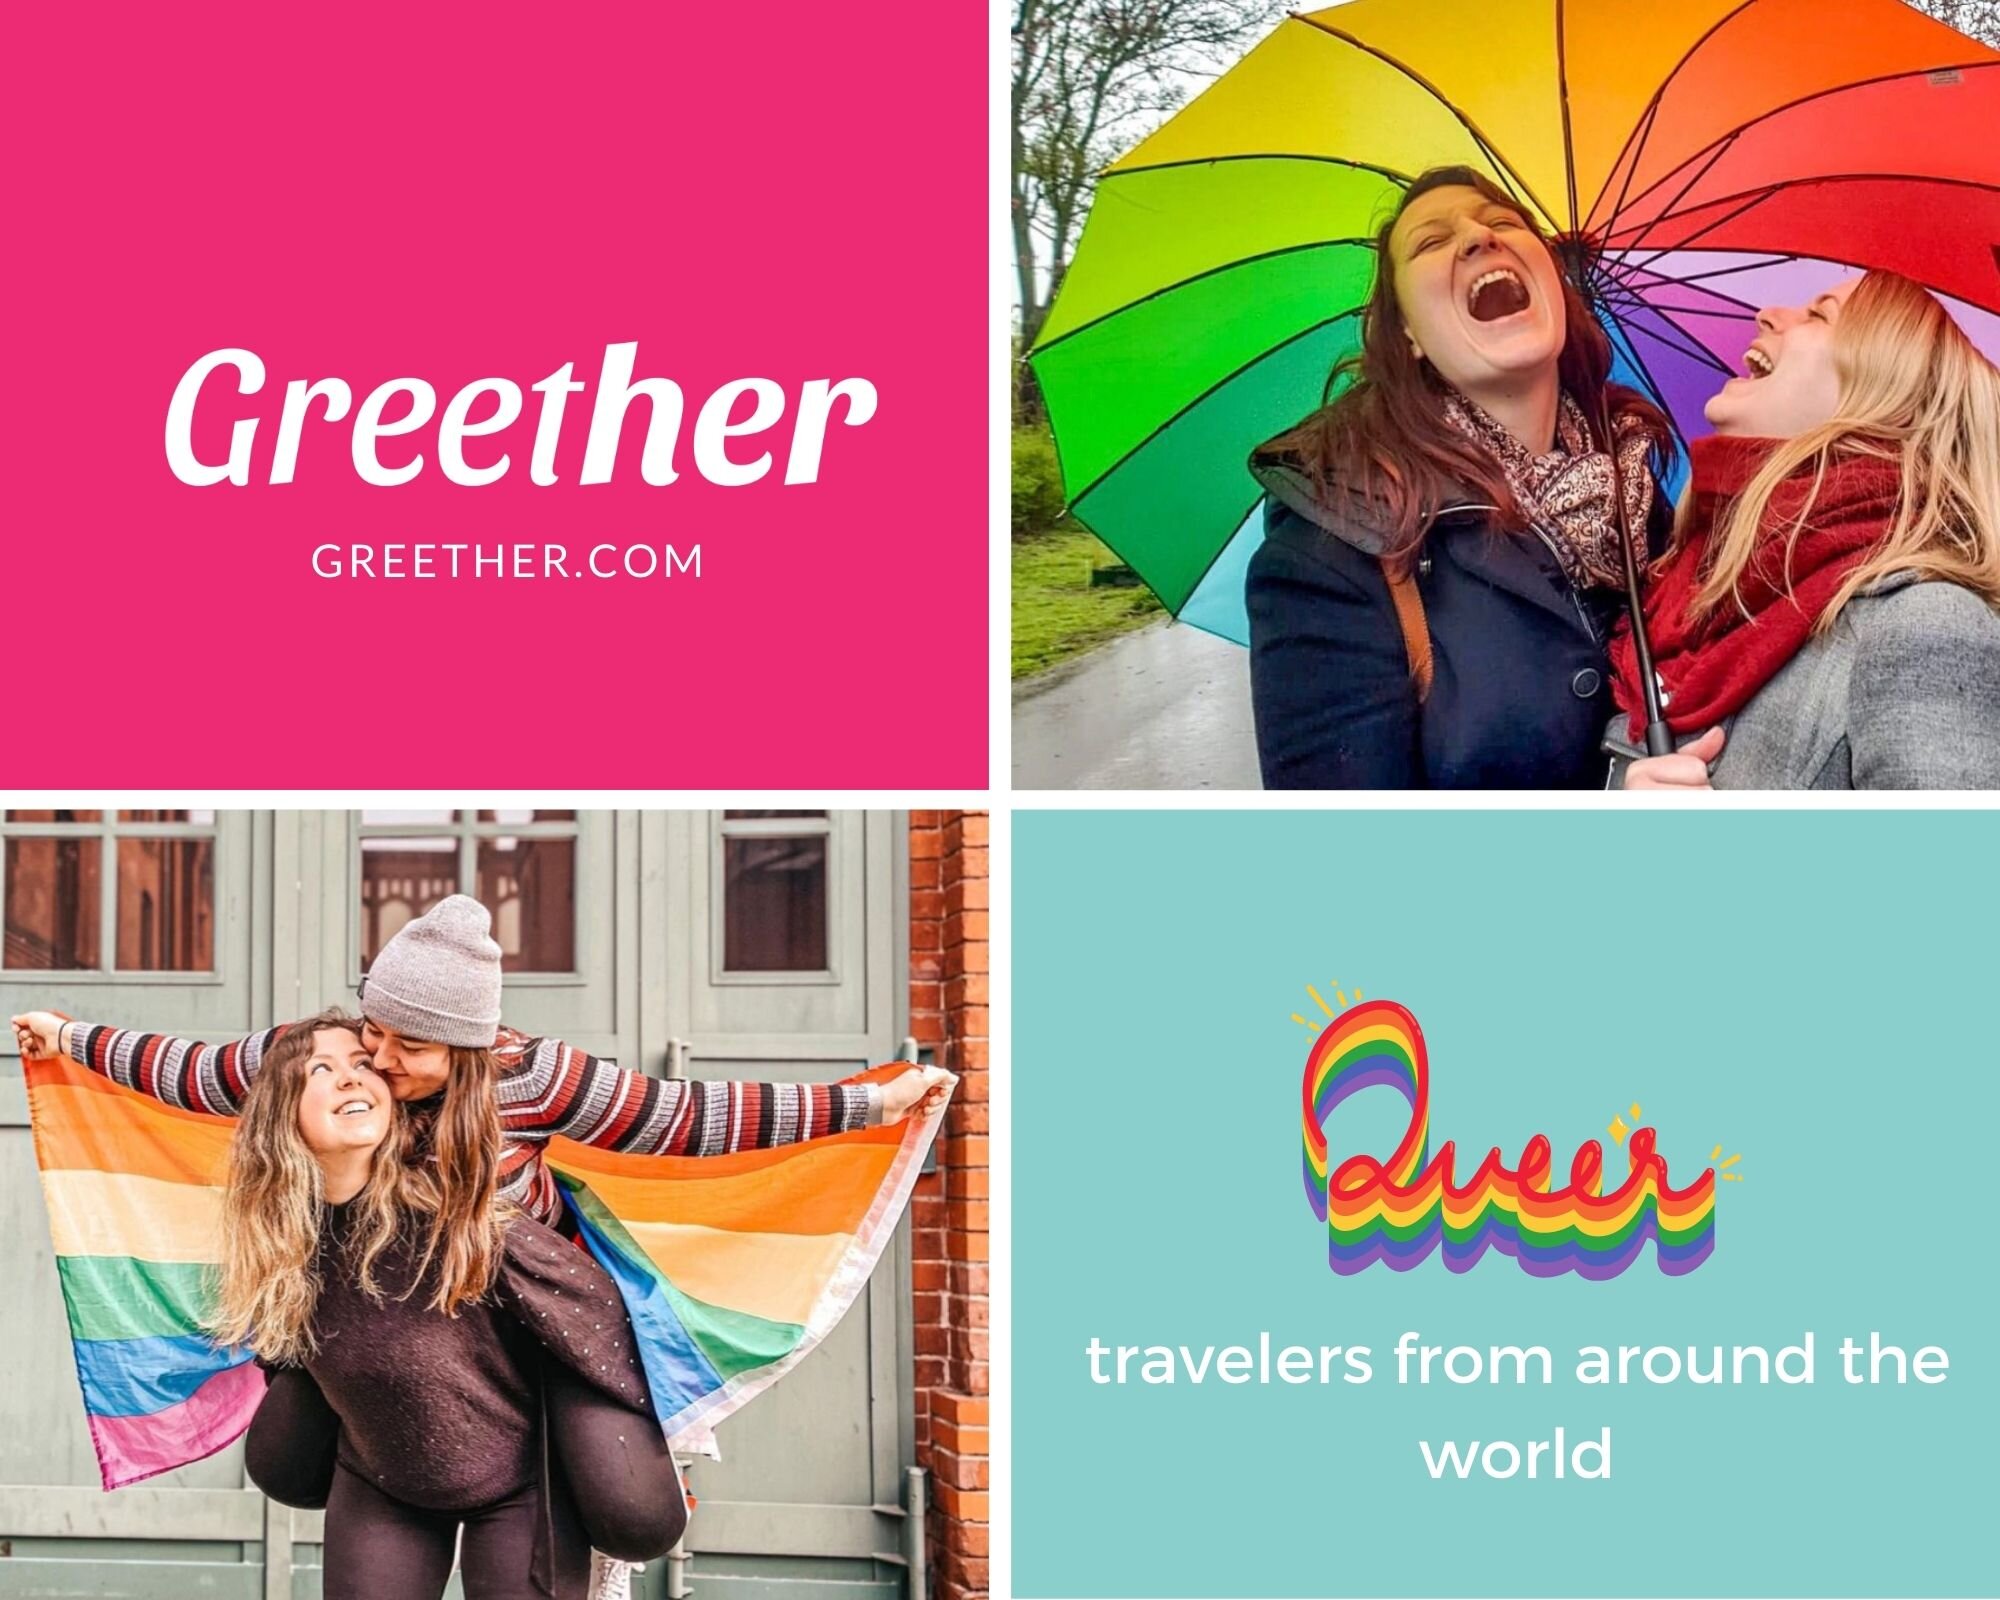 Read the inspirational messages from queer and lesbian travelers around the world!